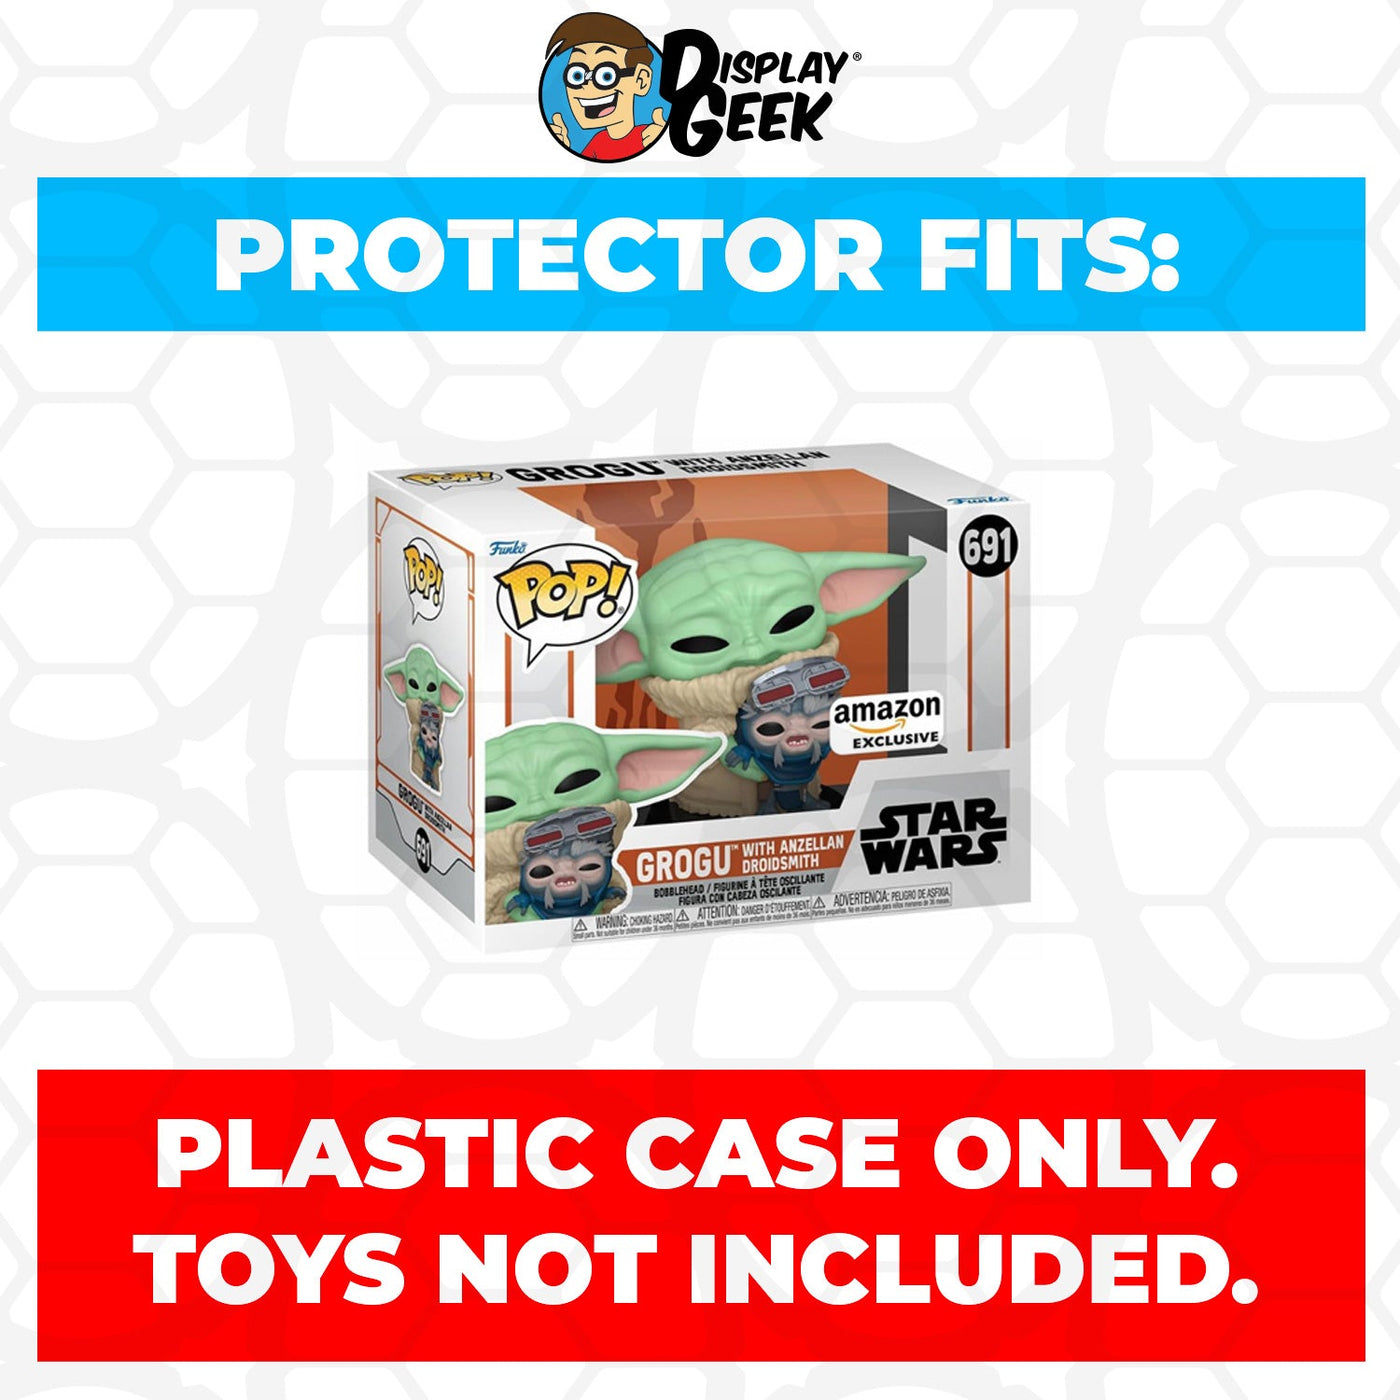 50 Pack of Pop Protector for 4 inch Standard Funko Pops on The Protector Guide App by Display Geek